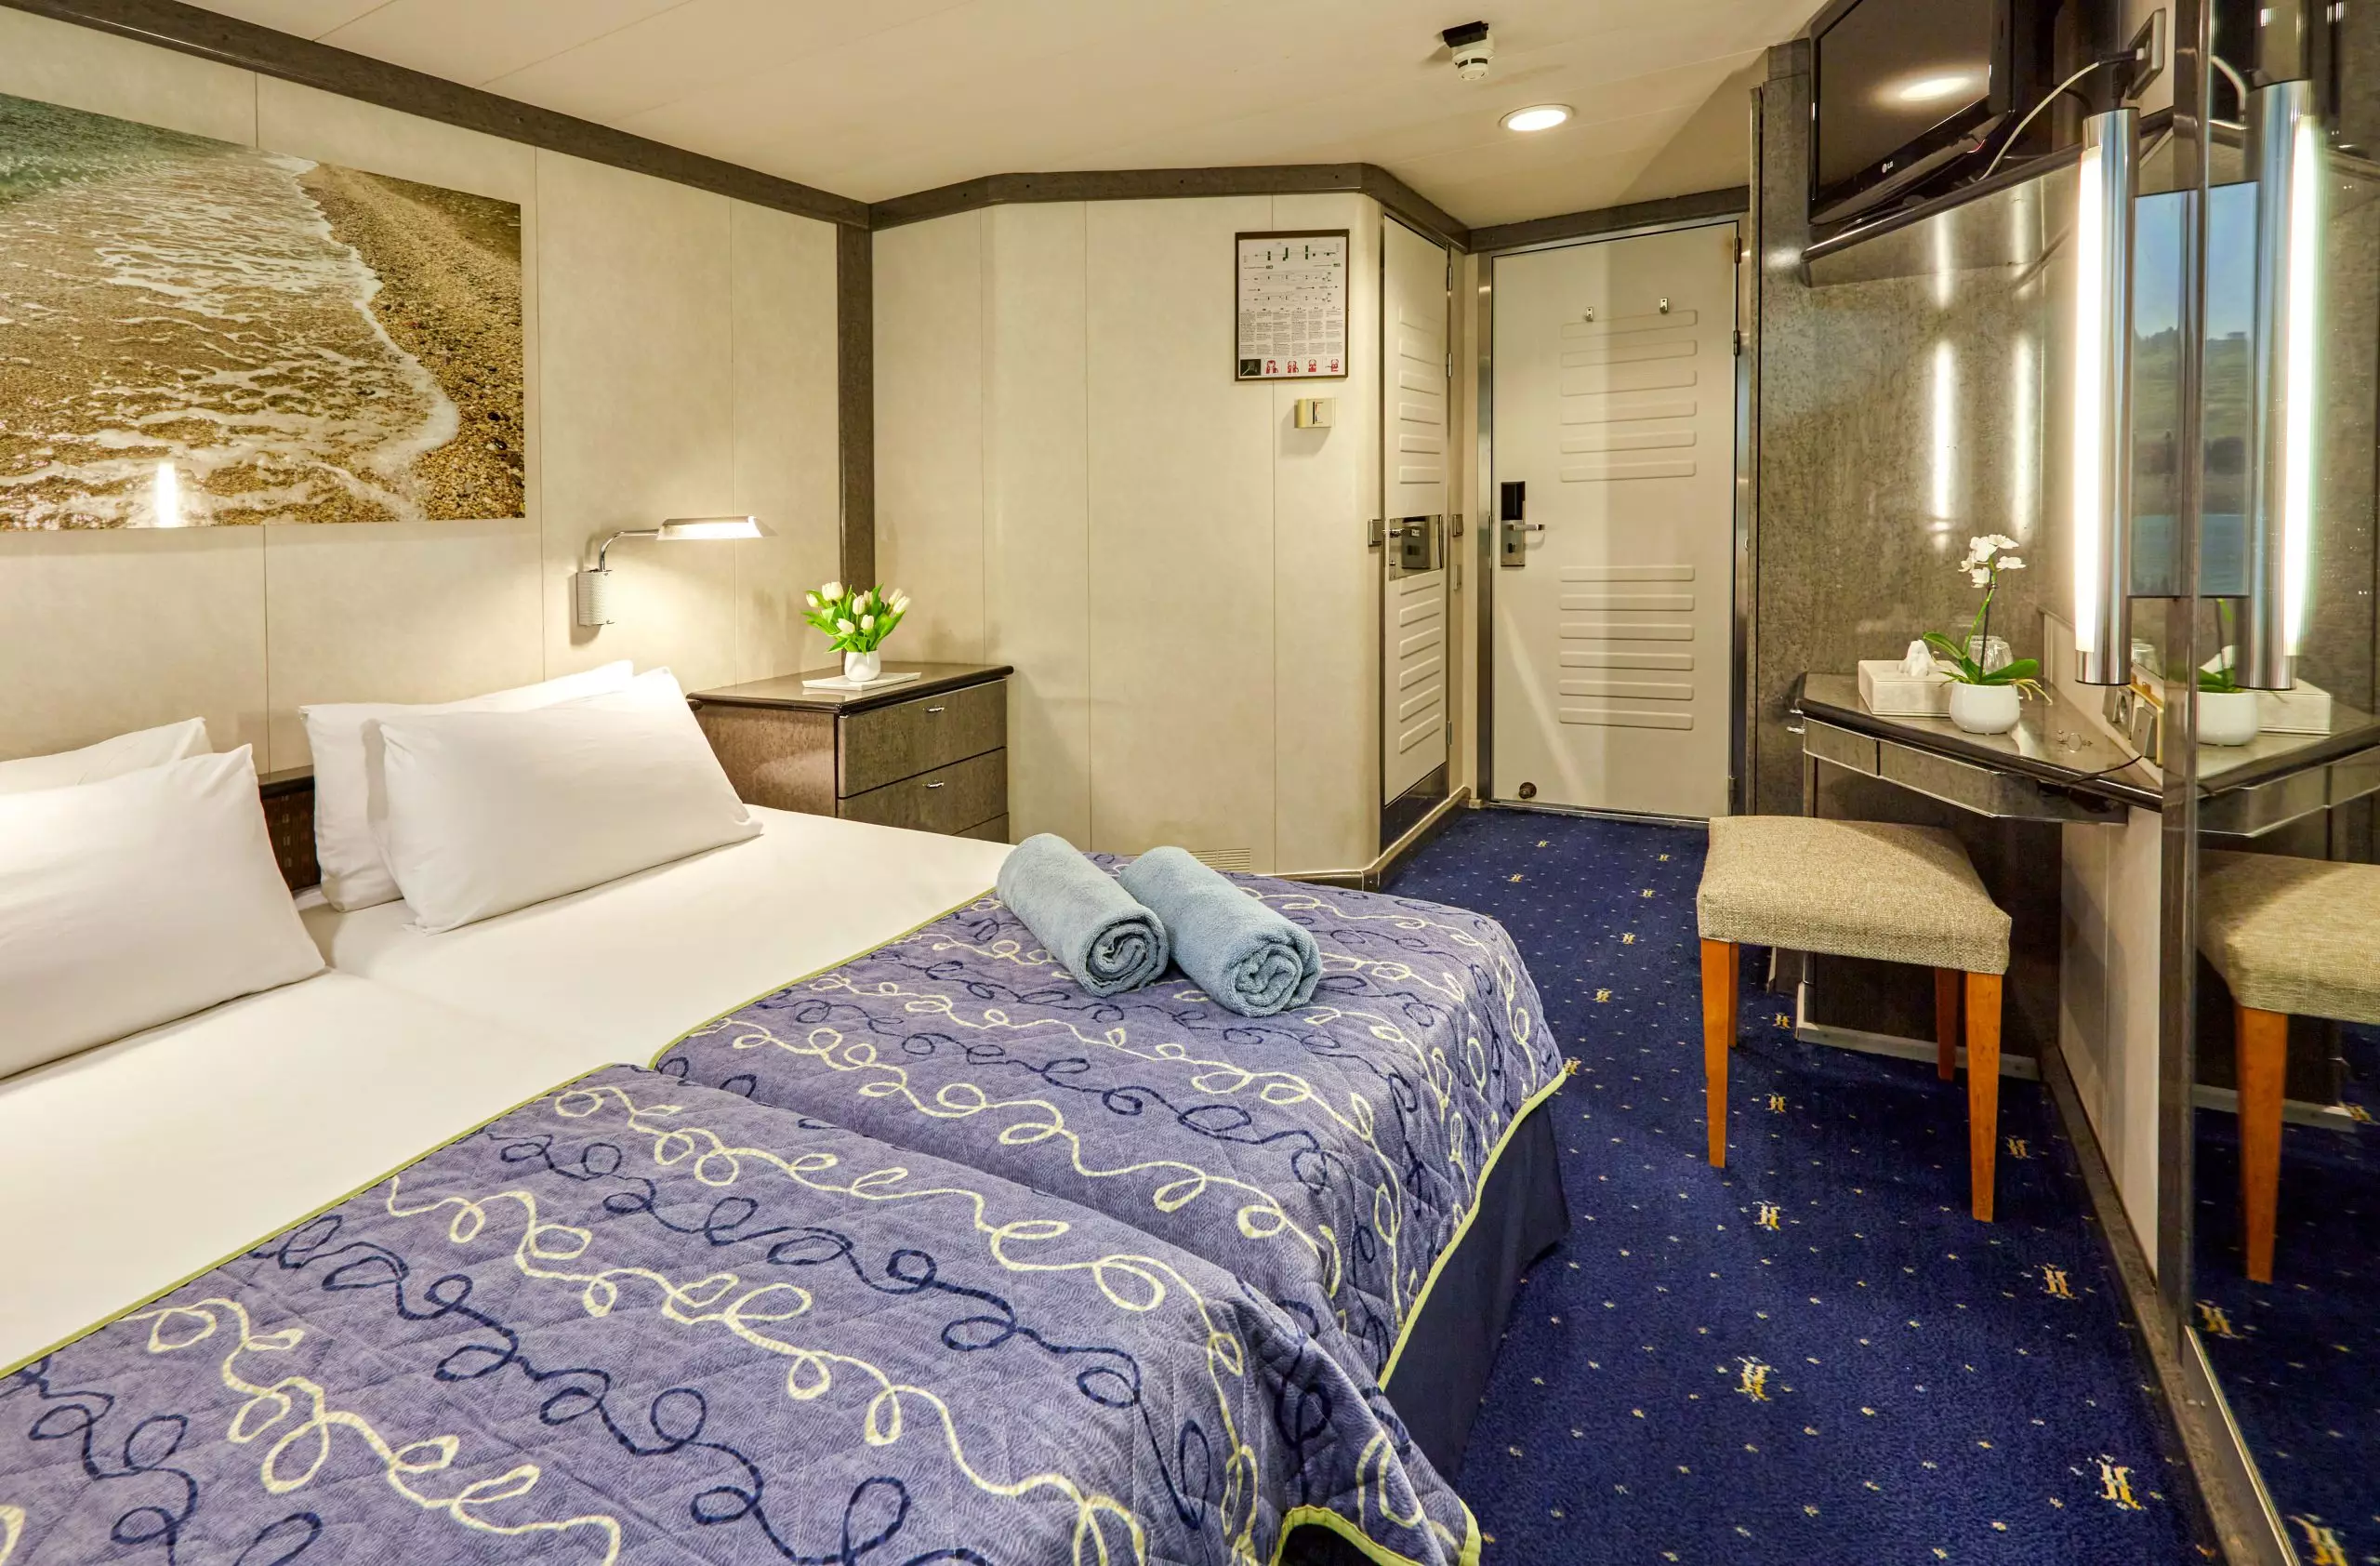 crystal staterooms xb 2